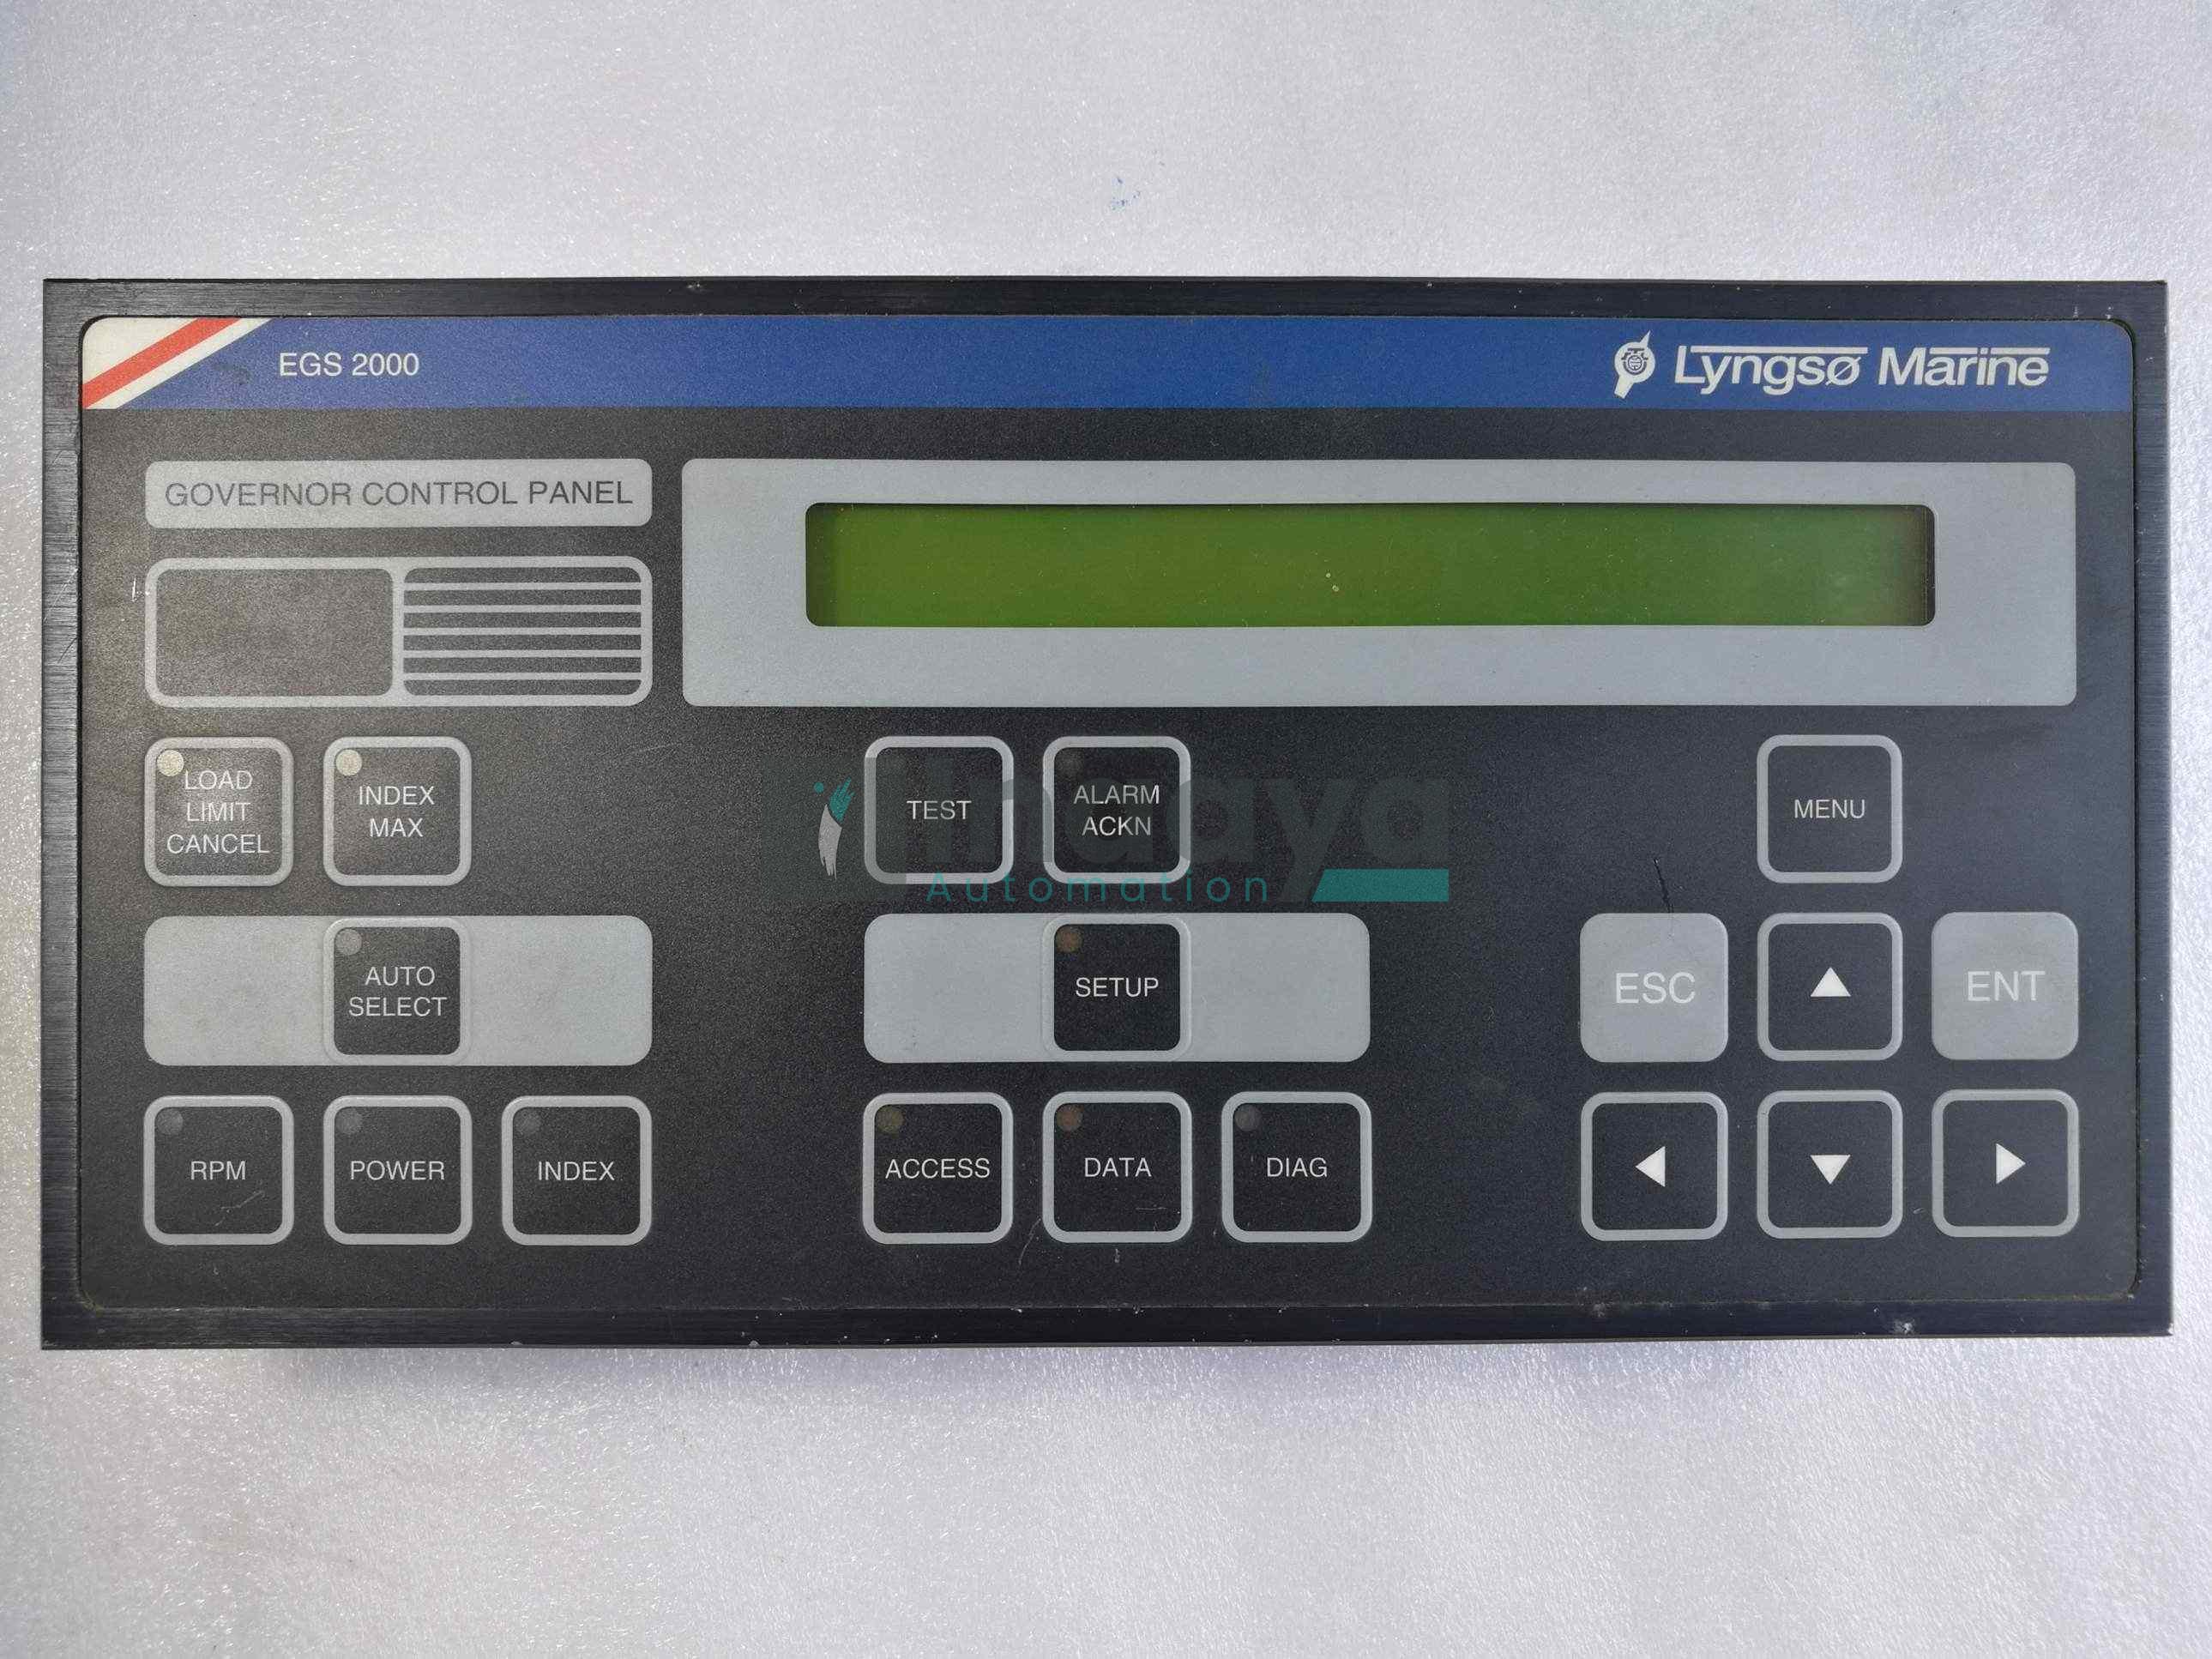 Lyngso Marine EGS 2000 Governor Control Panel